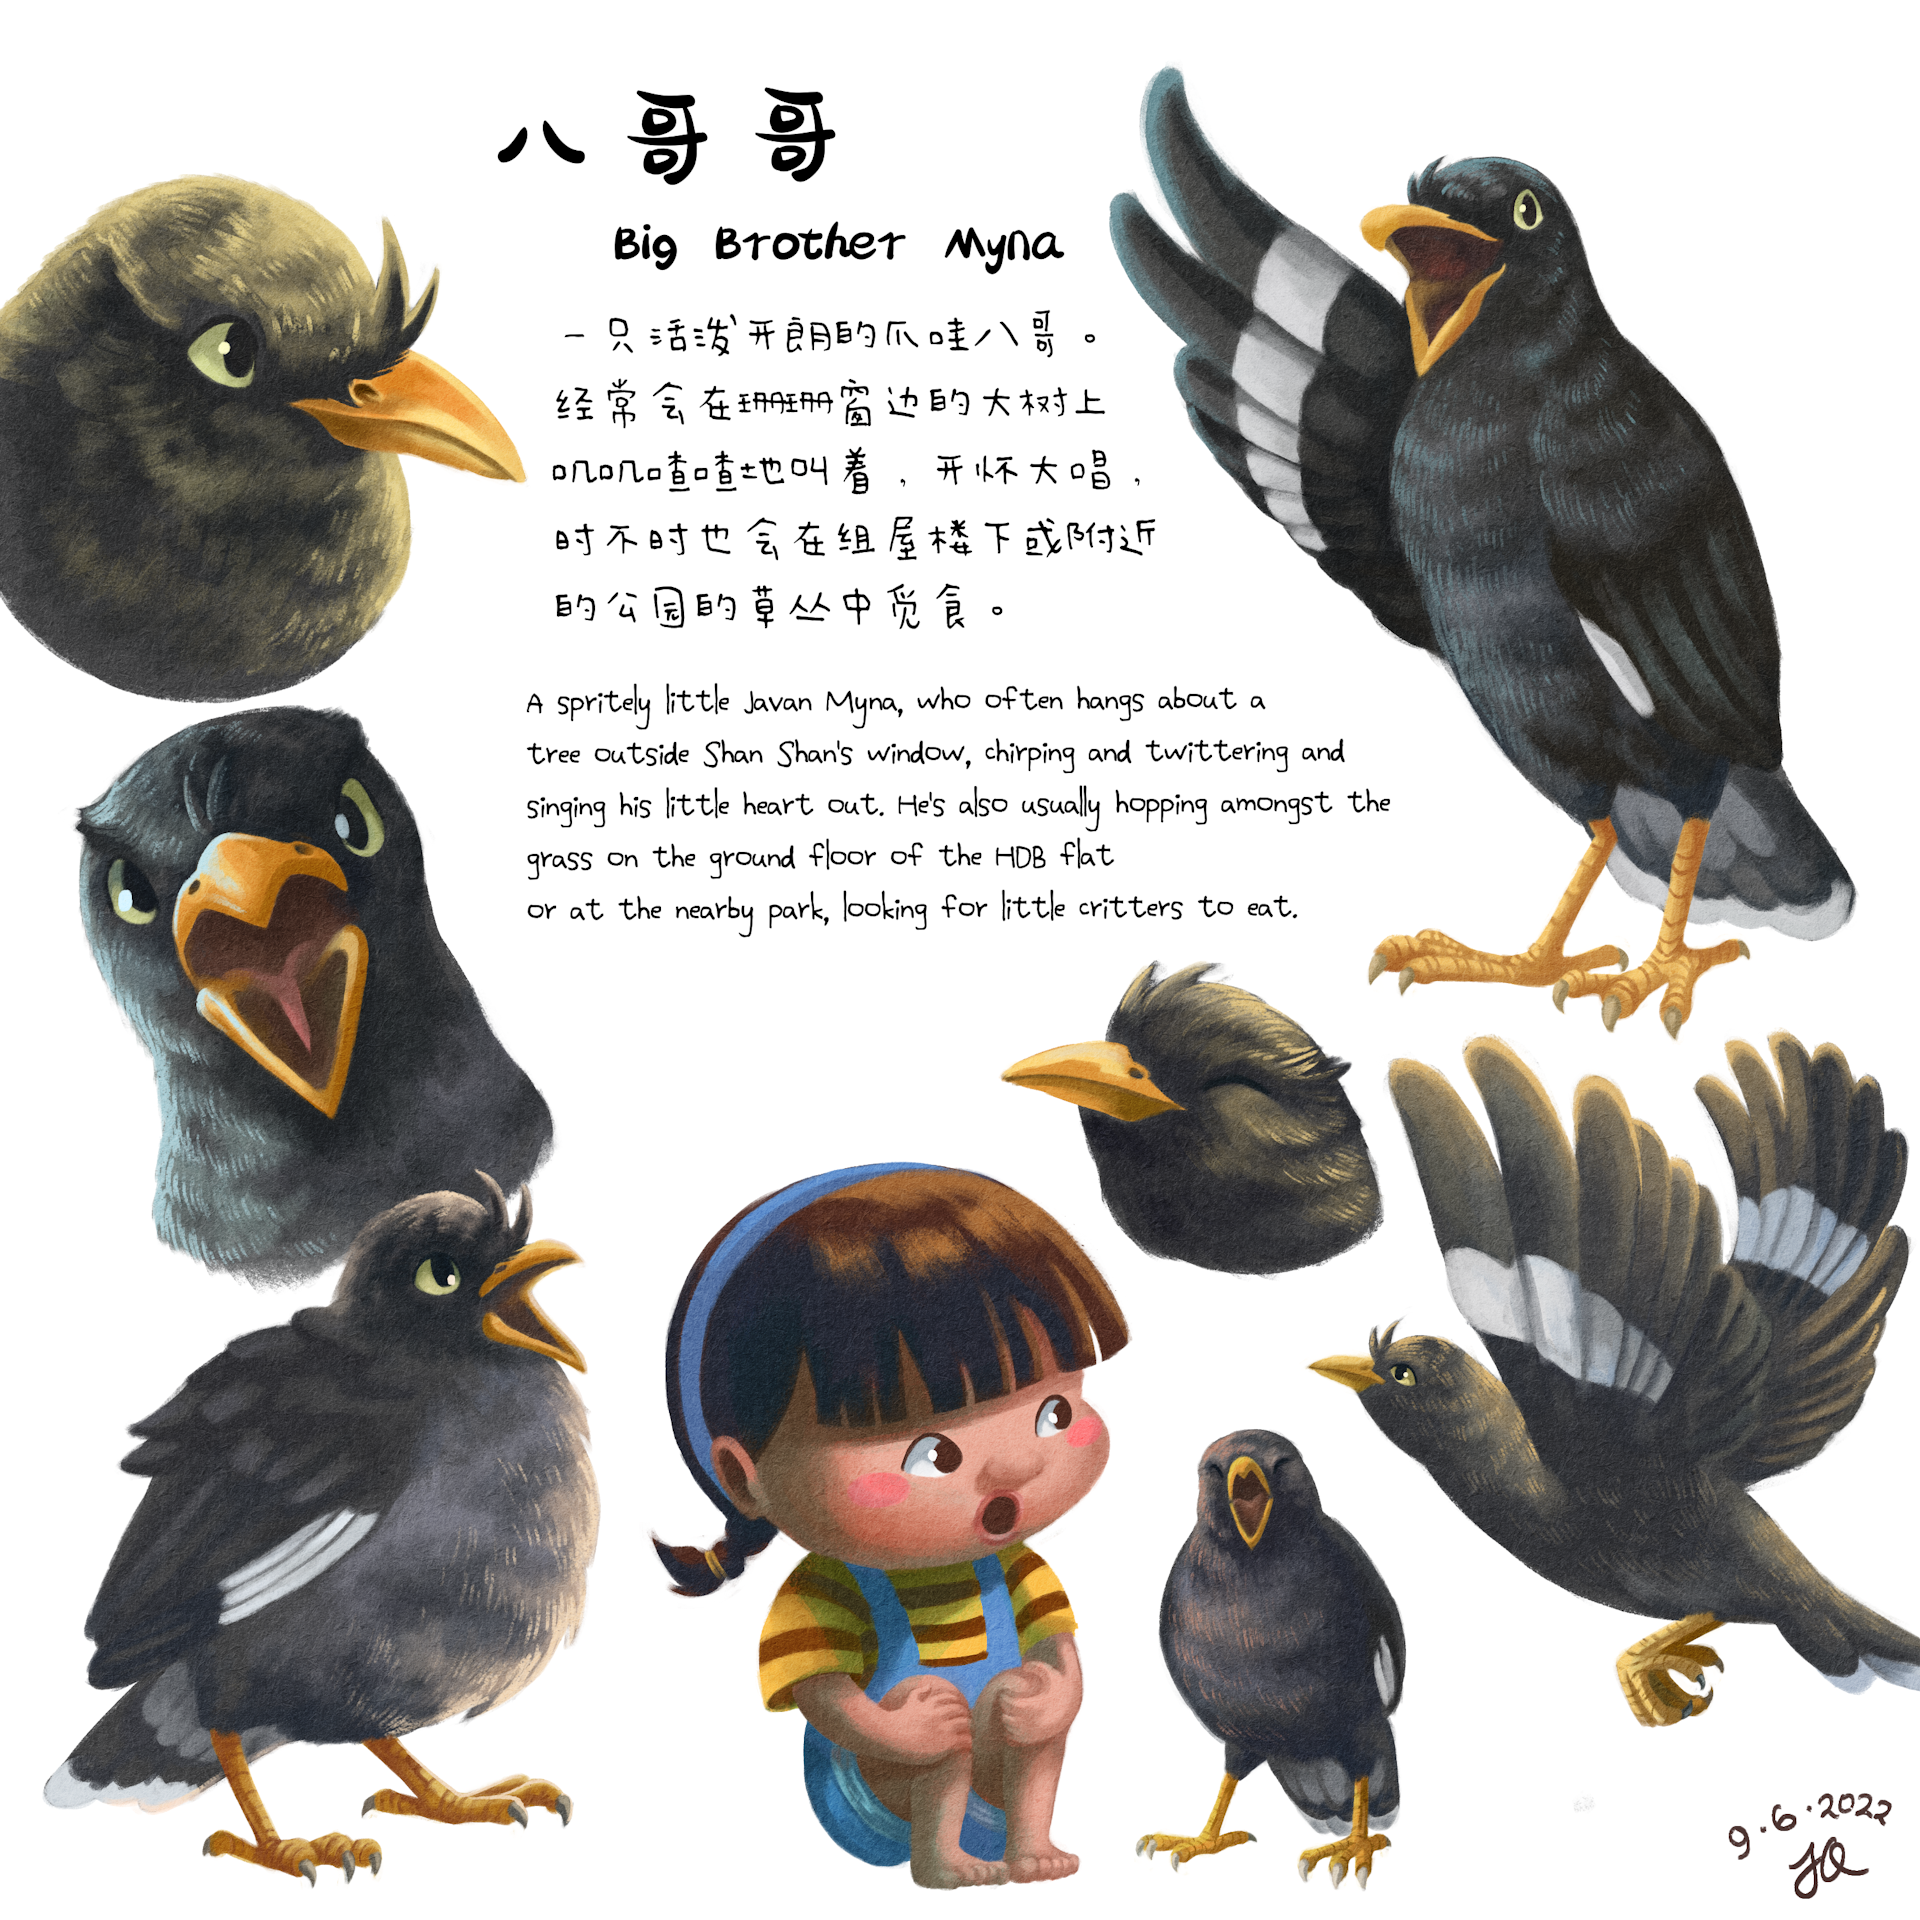 Character design model sheet of Big Brother Myna, who is a Javan Myna, showing him in a few different poses, juxtaposed with Shan Shan for size and mood reference.